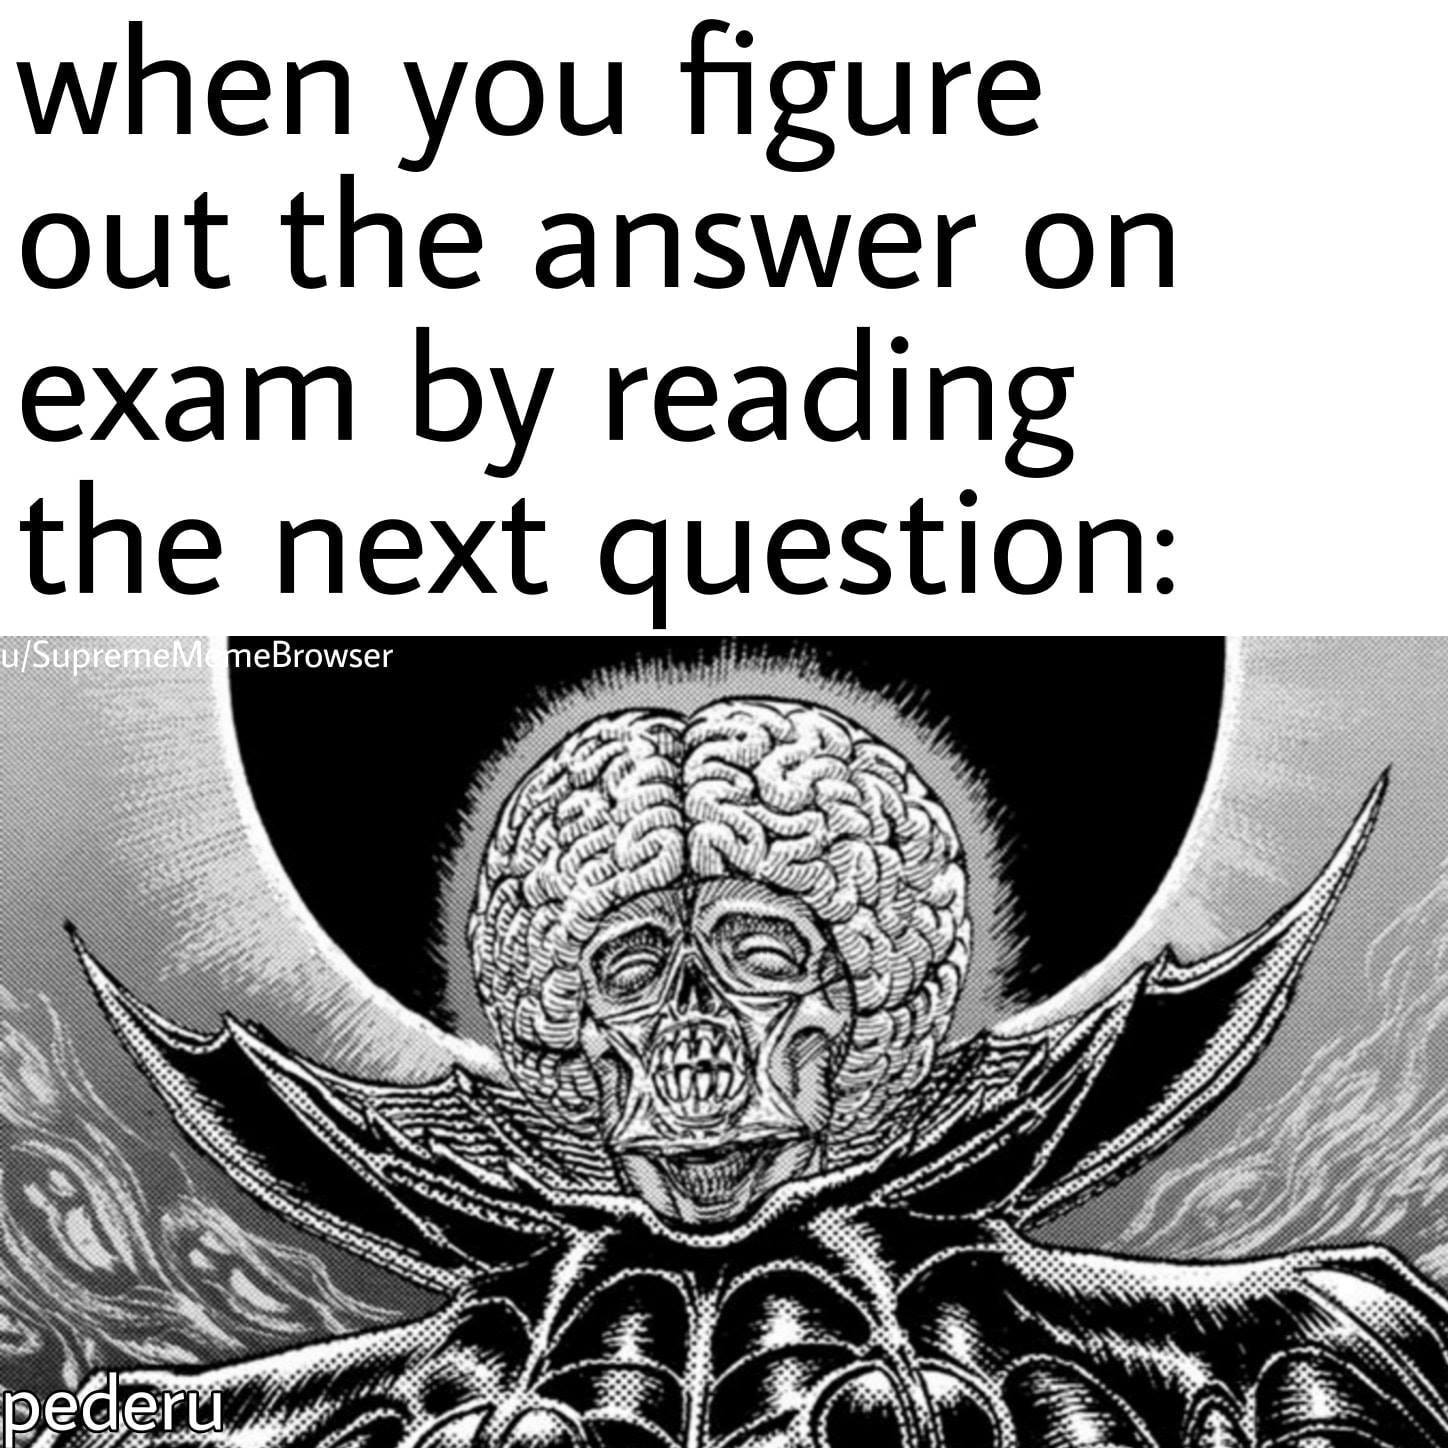 void berserk - when you figure out the answer on exam by reading the next question uSupremeM meBrowser a pederu